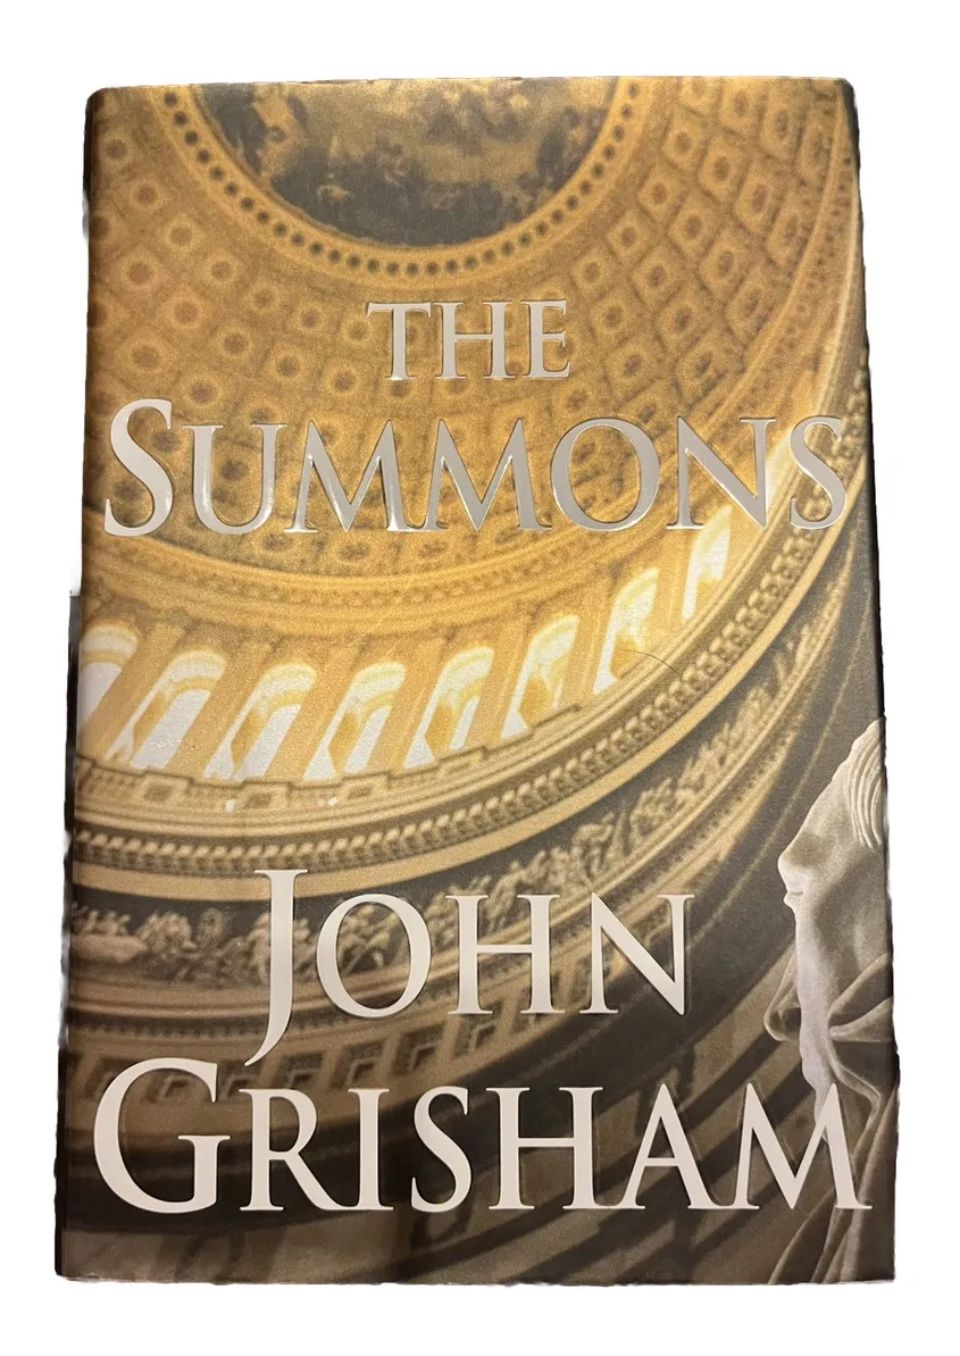 THE SUMMONS BY JOHN GRISHAM 2002, HARDCOVER, FIRST EDITION BOOK NOVEL